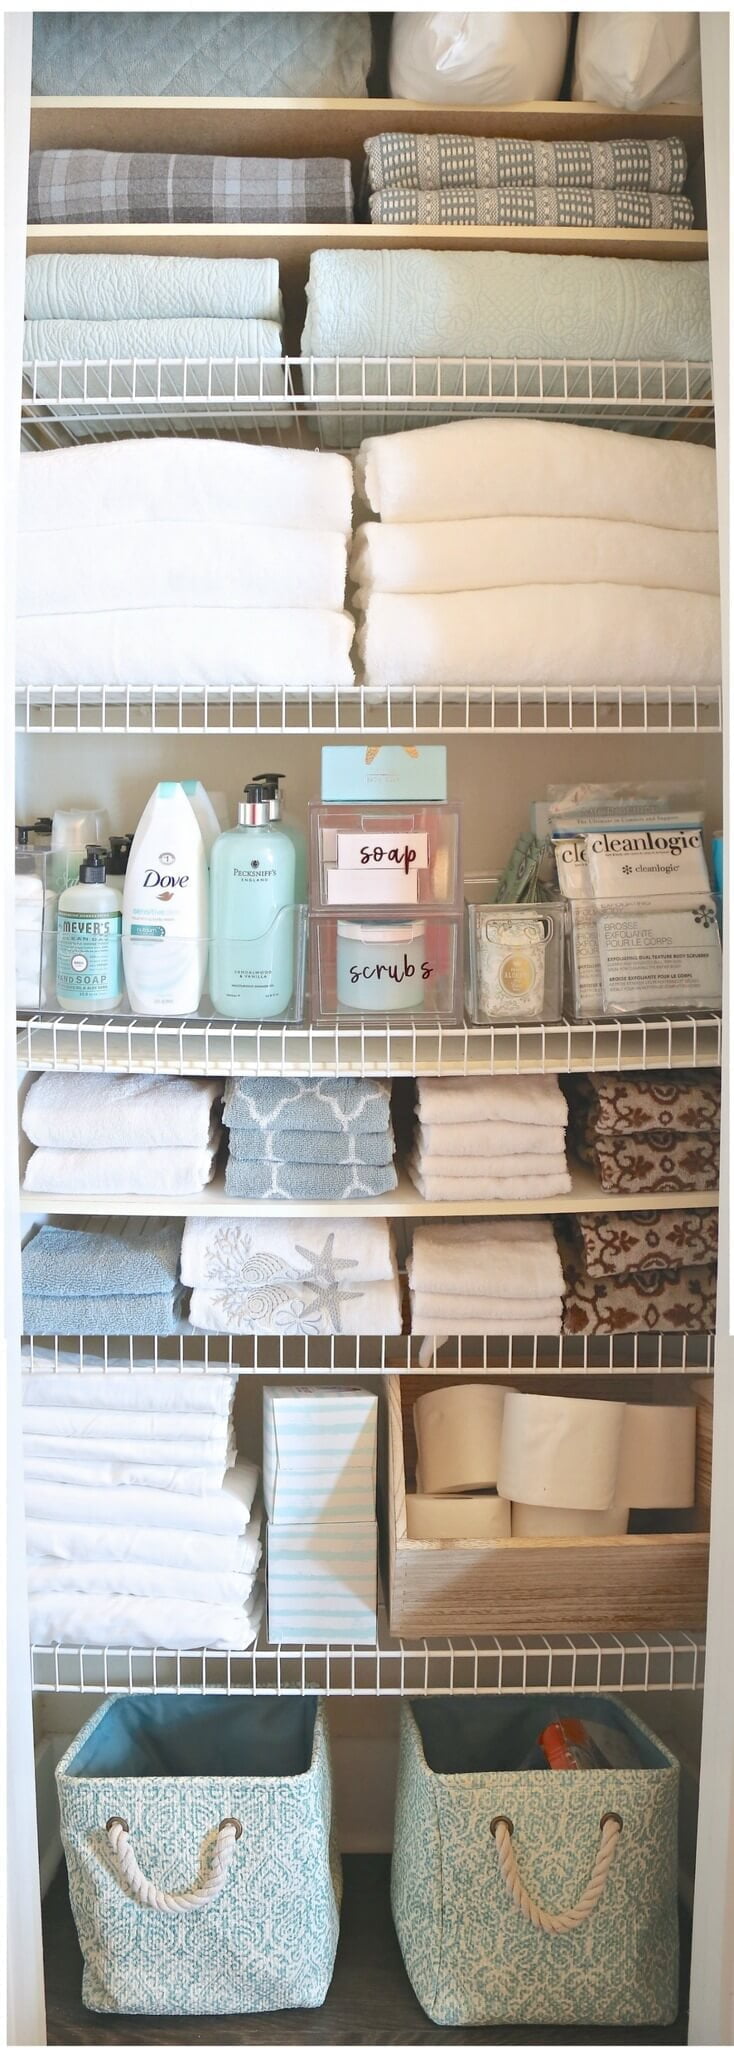 Towel Storage Ideas For Small Spaces - Best Design Idea